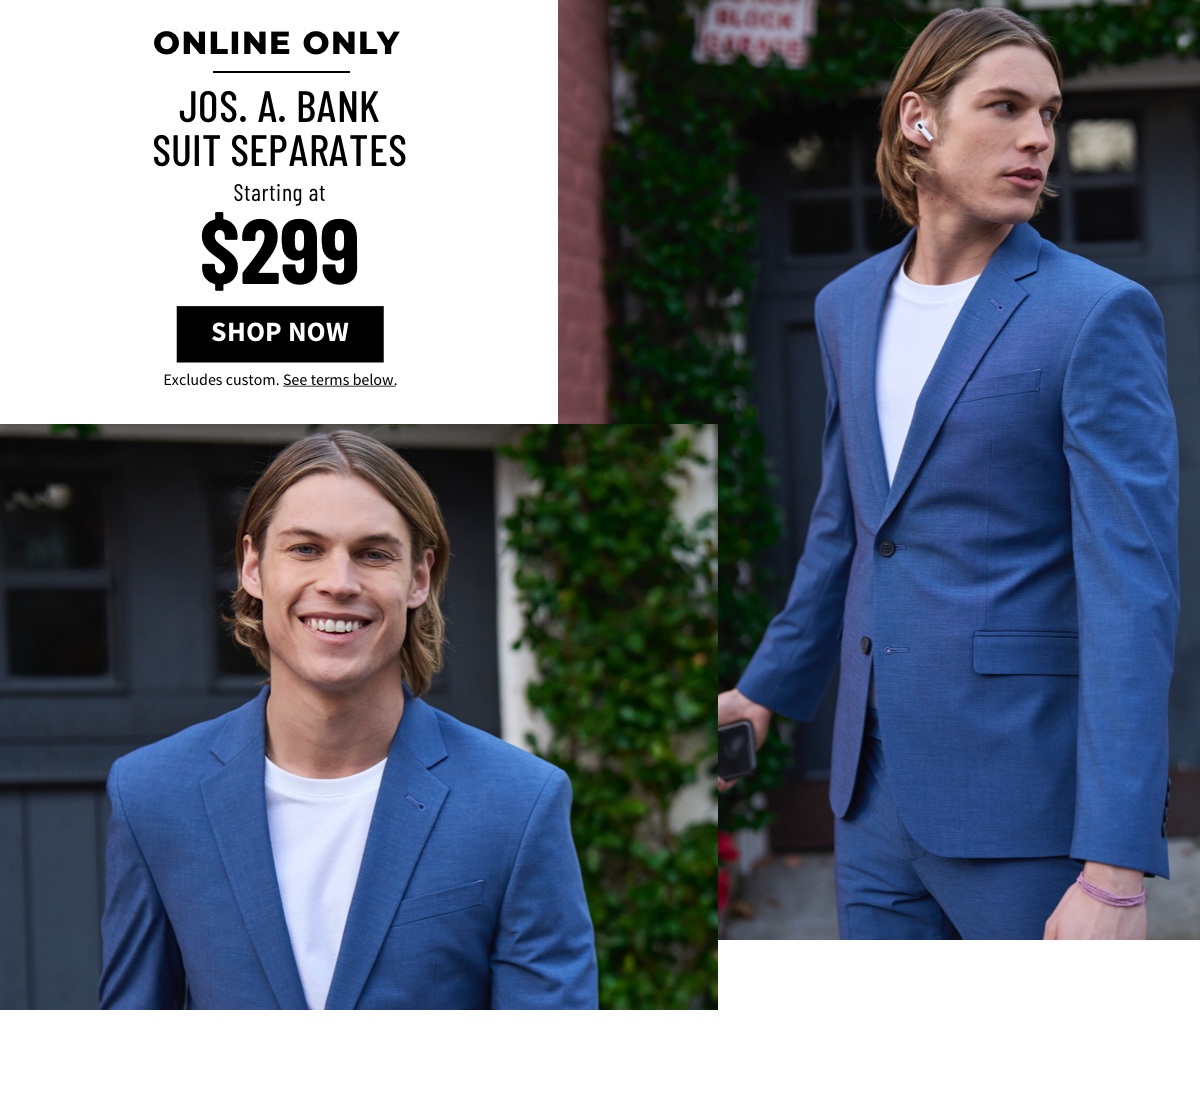 Online Only Jos. A. Bank Suit Separates Starting at $299 Shop Now Excludes custom. See terms below.